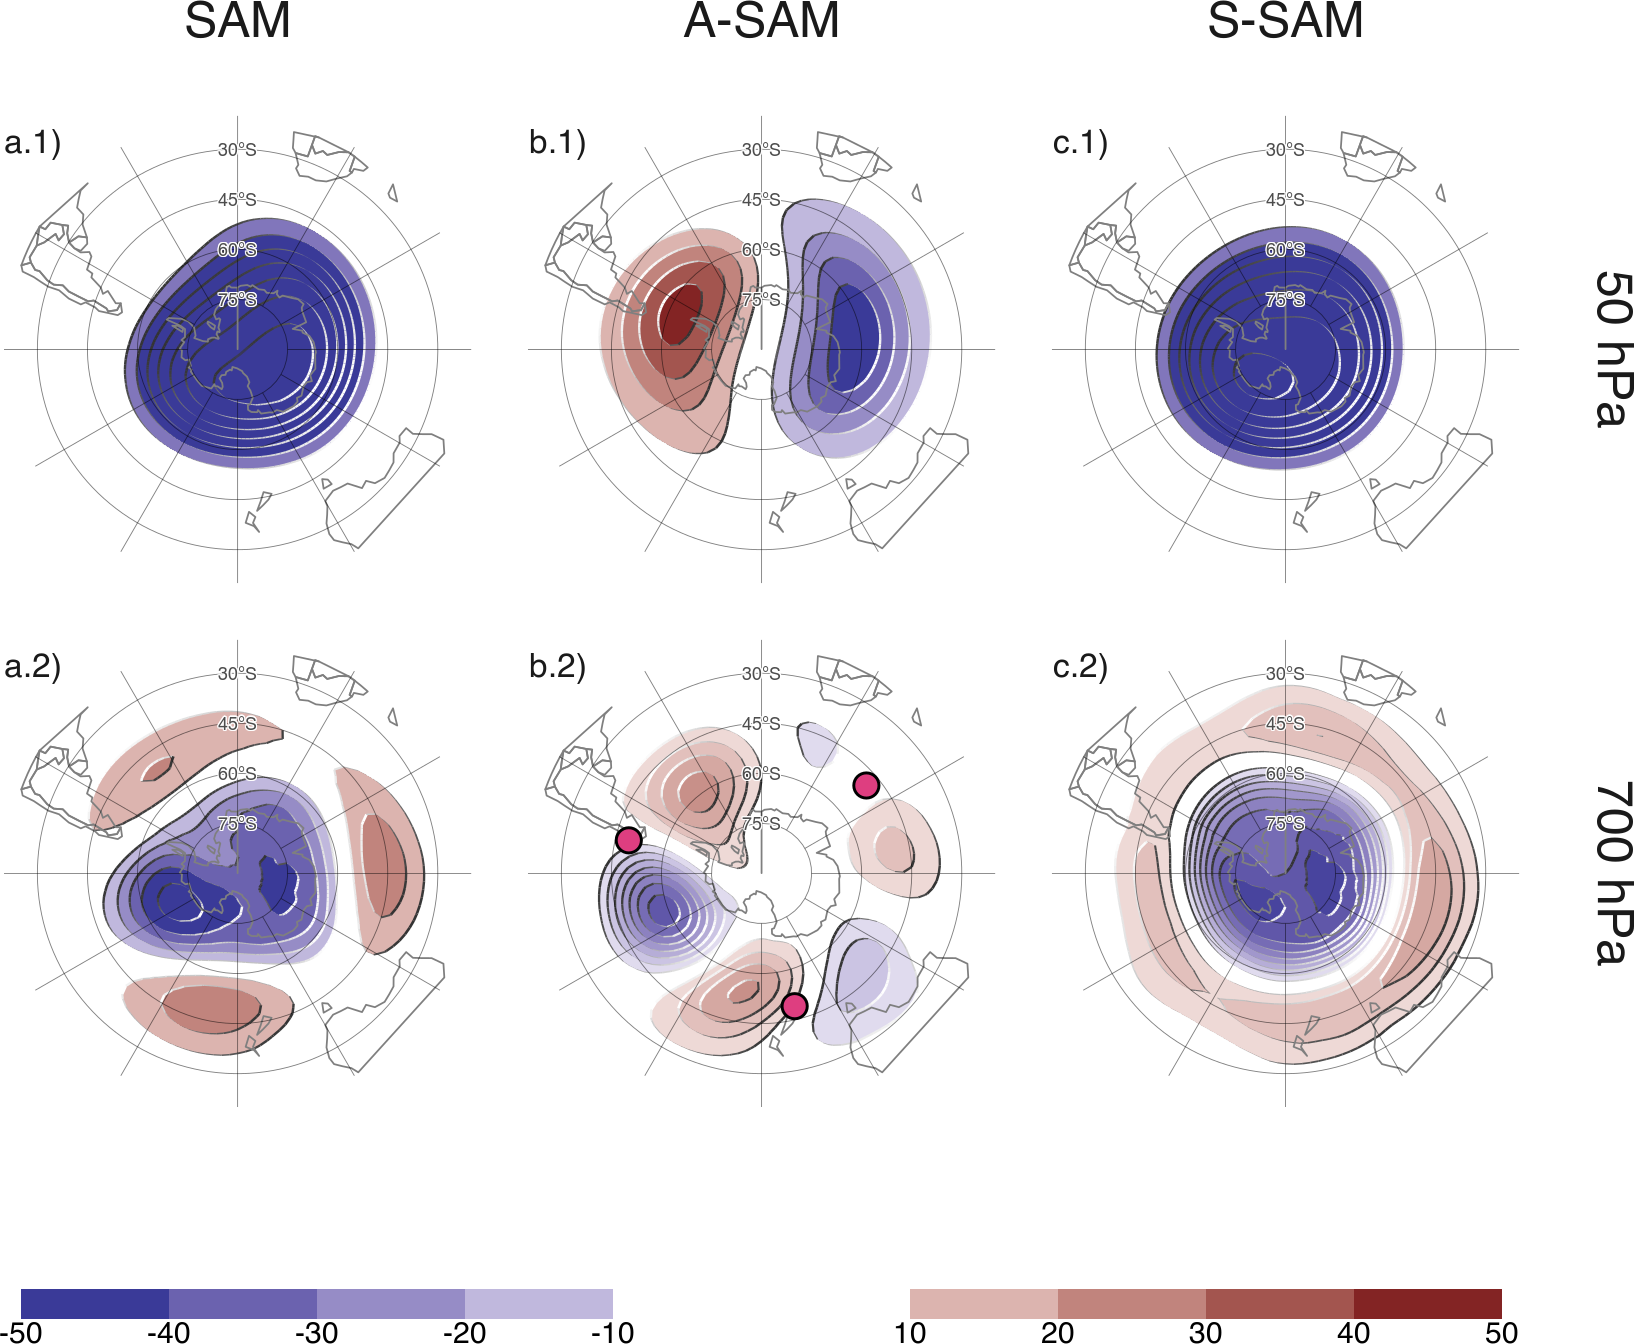 Six maps similar to the ones before. They are arranged on a grid of two rows labeled "50 hPa" and "700 hPa" and three columns named "SAM", "A-SAM" and "S-SAM". The 700 hPa row shows three plots that are very similar to the ones in Figure 1. The main difference is that the last map (S-SAM) is not a perfect ring, and has some small deviations from a perfect circle. In the 50 hPa row, the first plot (SAM) shows a single and very intense area of low values at high latitudes which is slightly off-centre. ç The second plot (A-SAM) shows a dipole with low values to the right and high values to the left with the South Pole in between them. The third plot (S-SAM) is similar to the first but the shape is much closer to a circle and more closel-centered in the South Pole.